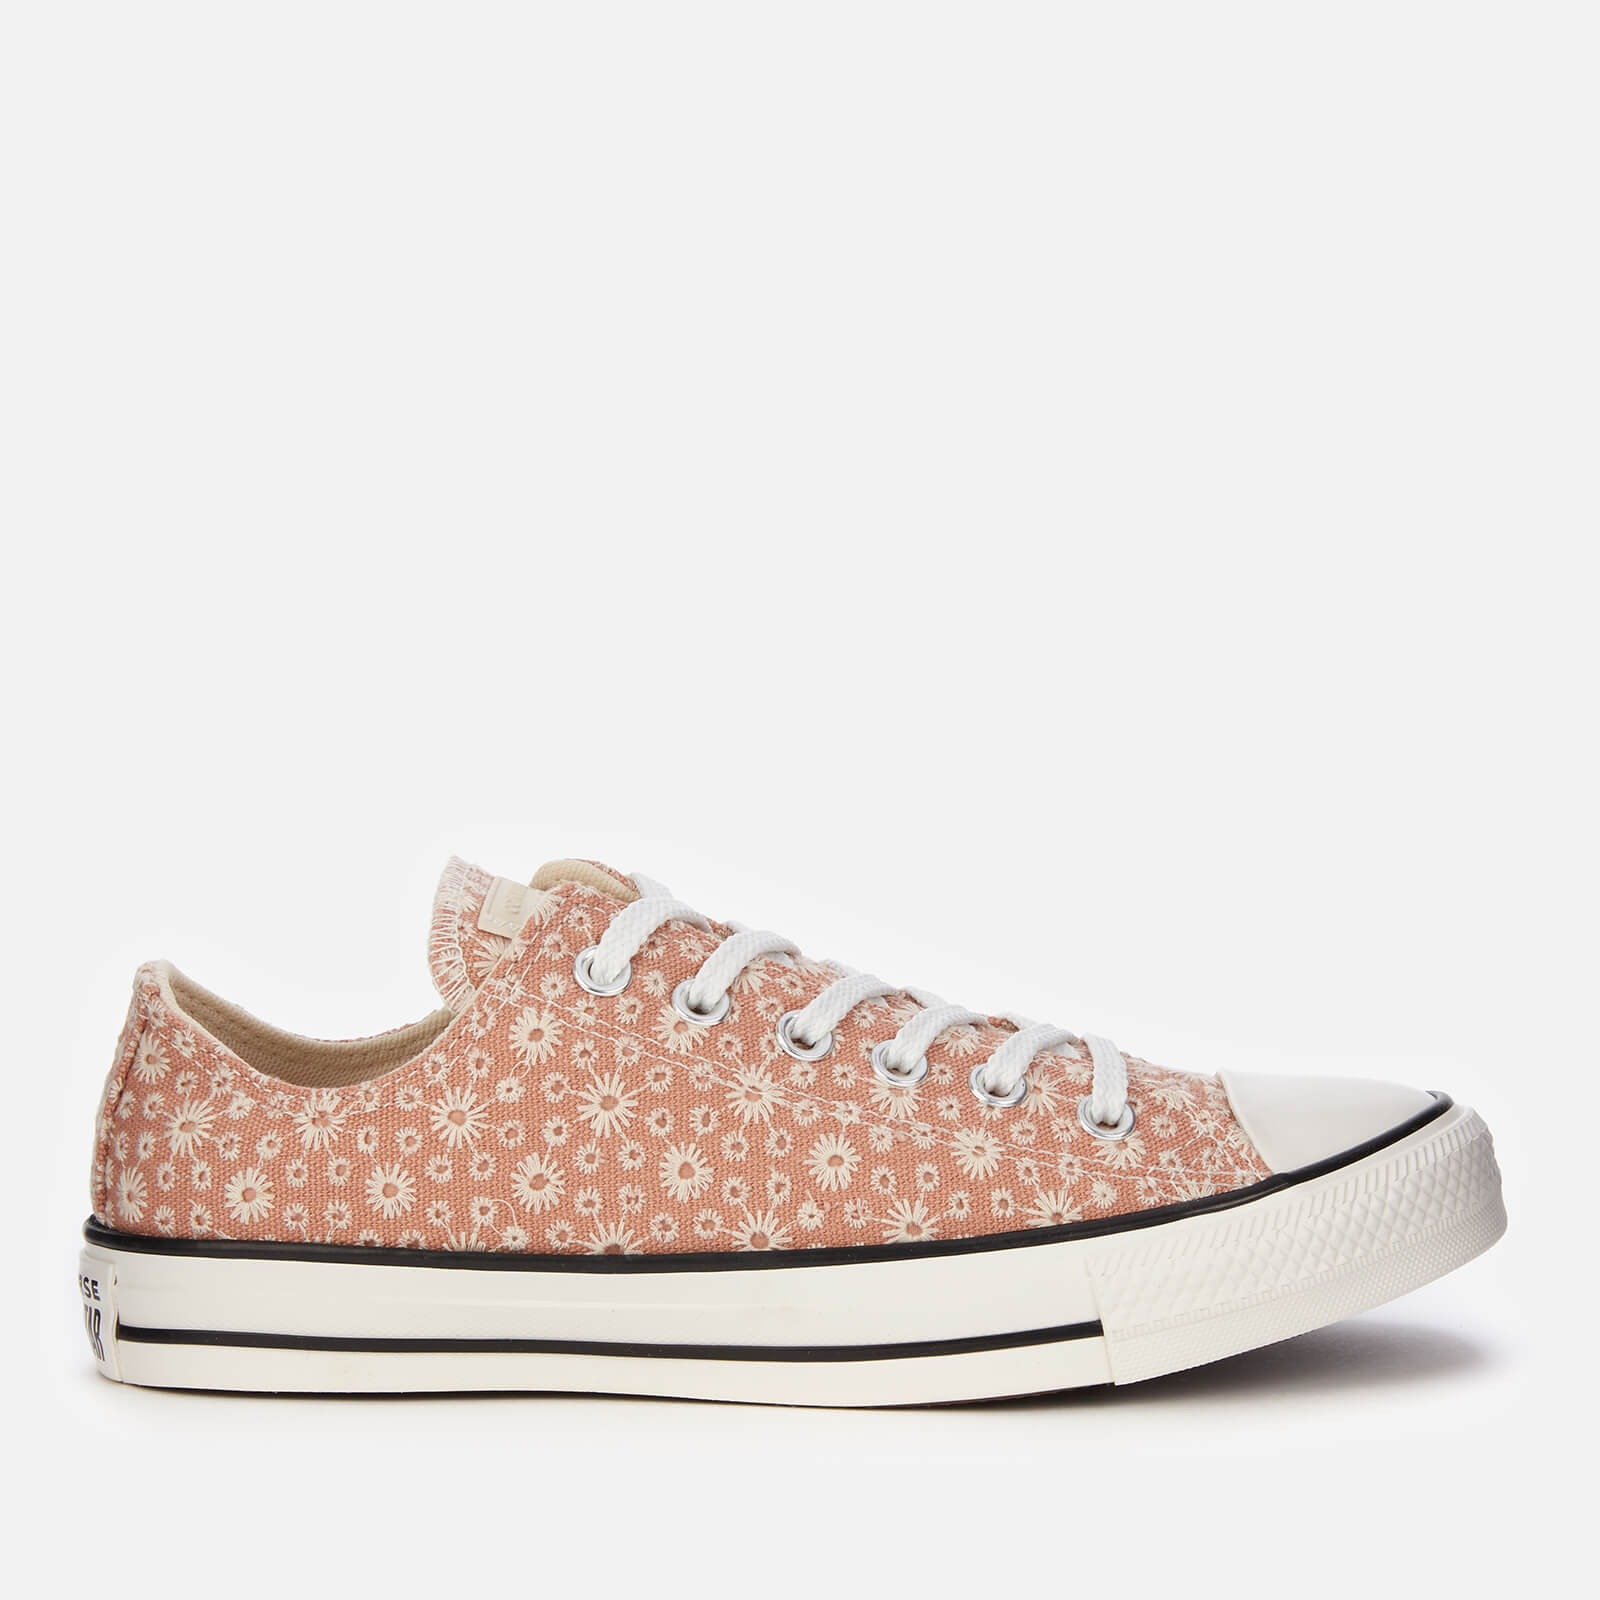 Converse Women's Chuck Taylor All Star Ox Trainers - Vachetta Beige/Natural Ivory/Vintage White - UK 3